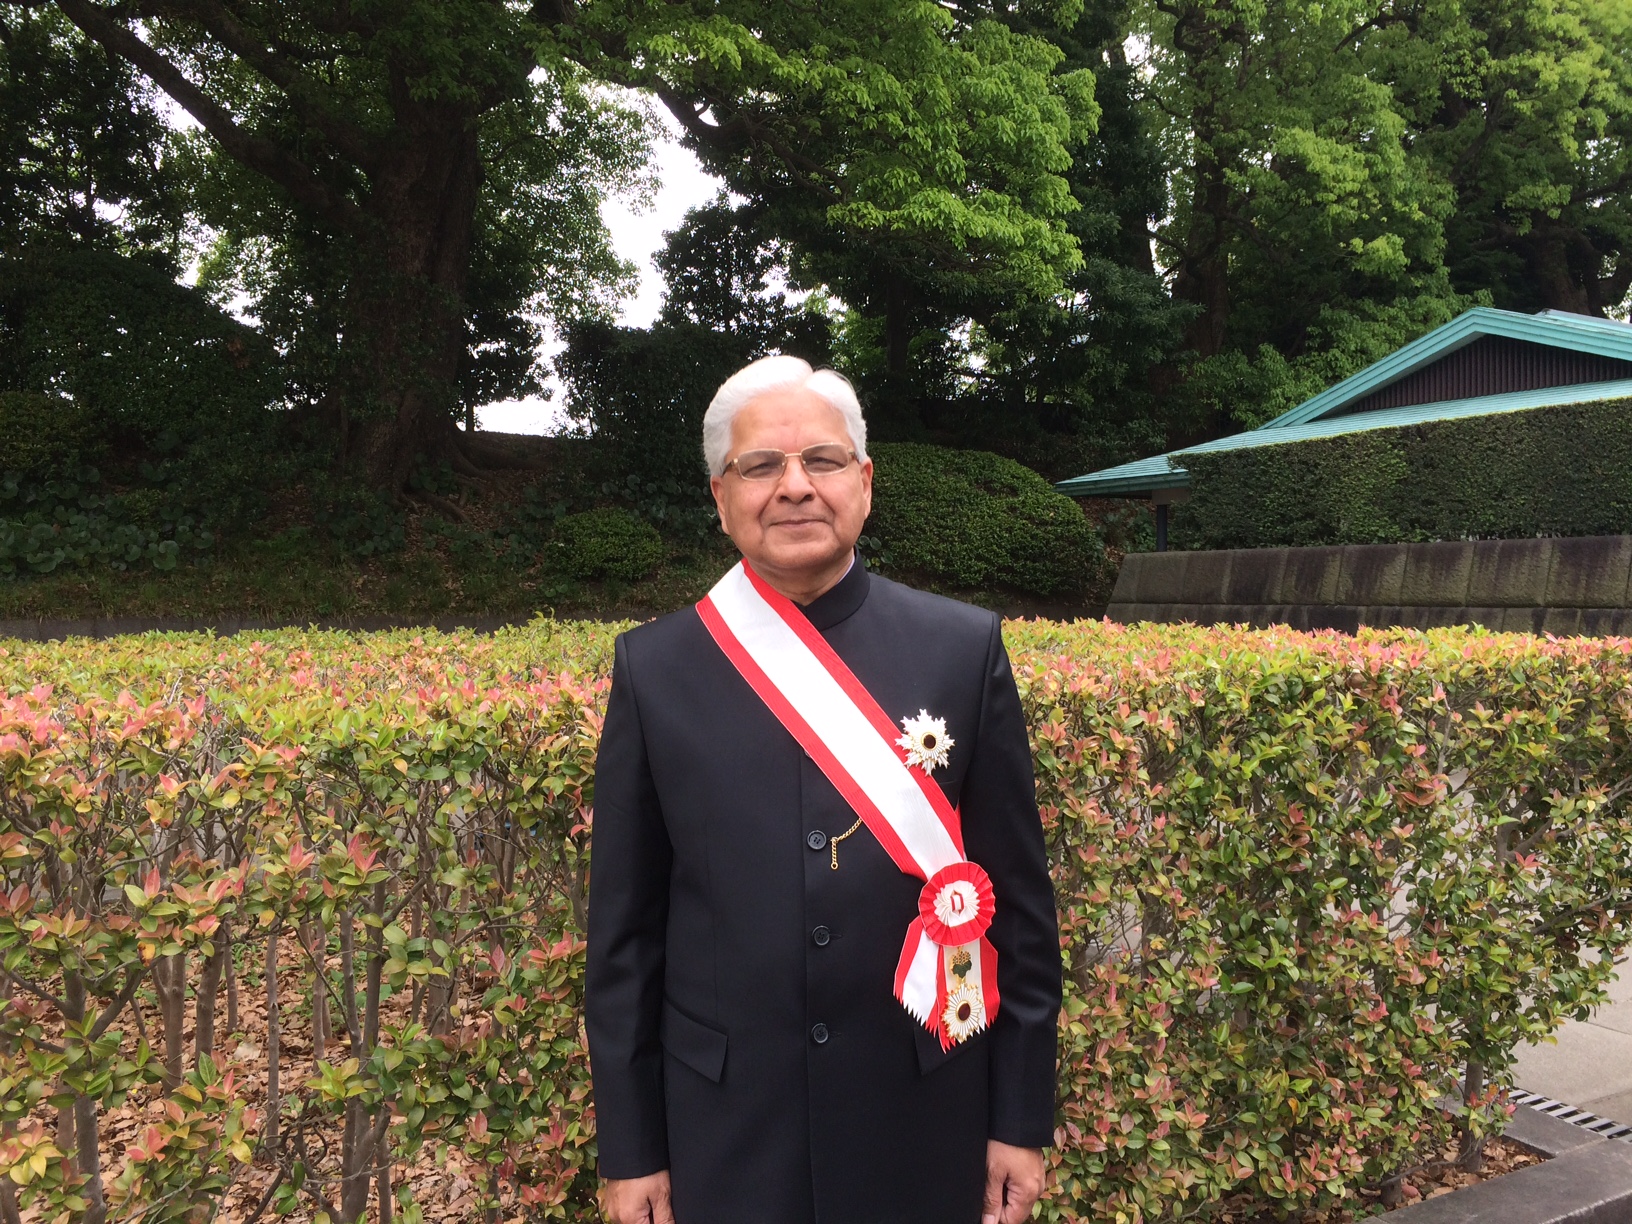 Dr Ashwani Kumar decorated with Grand Cordon of the Order of the Rising Sun by Japan